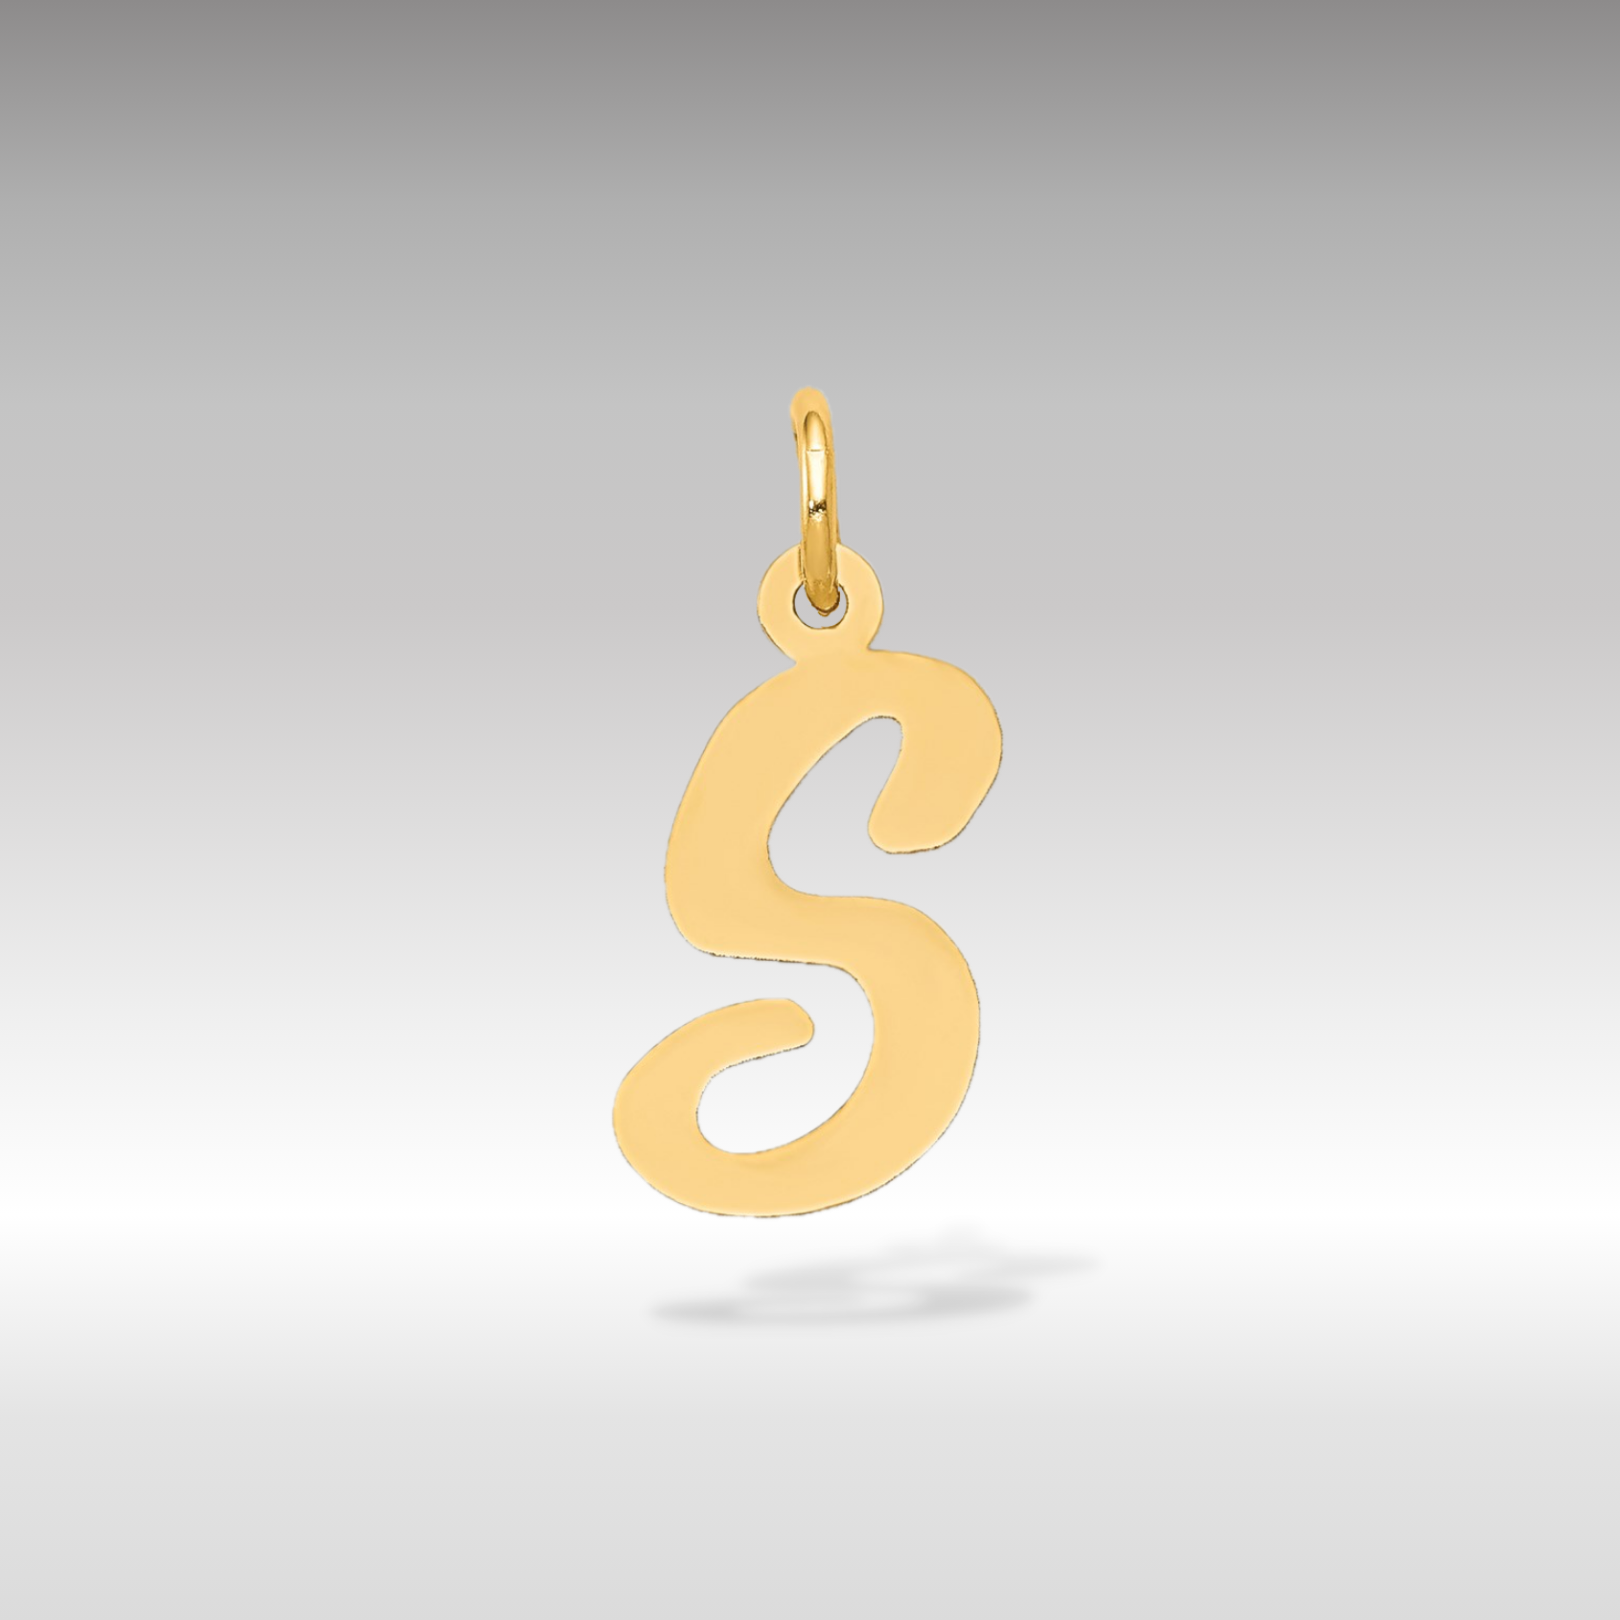 14K Gold Script Letter "S" Initial Pendant - Charlie & Co. Jewelry